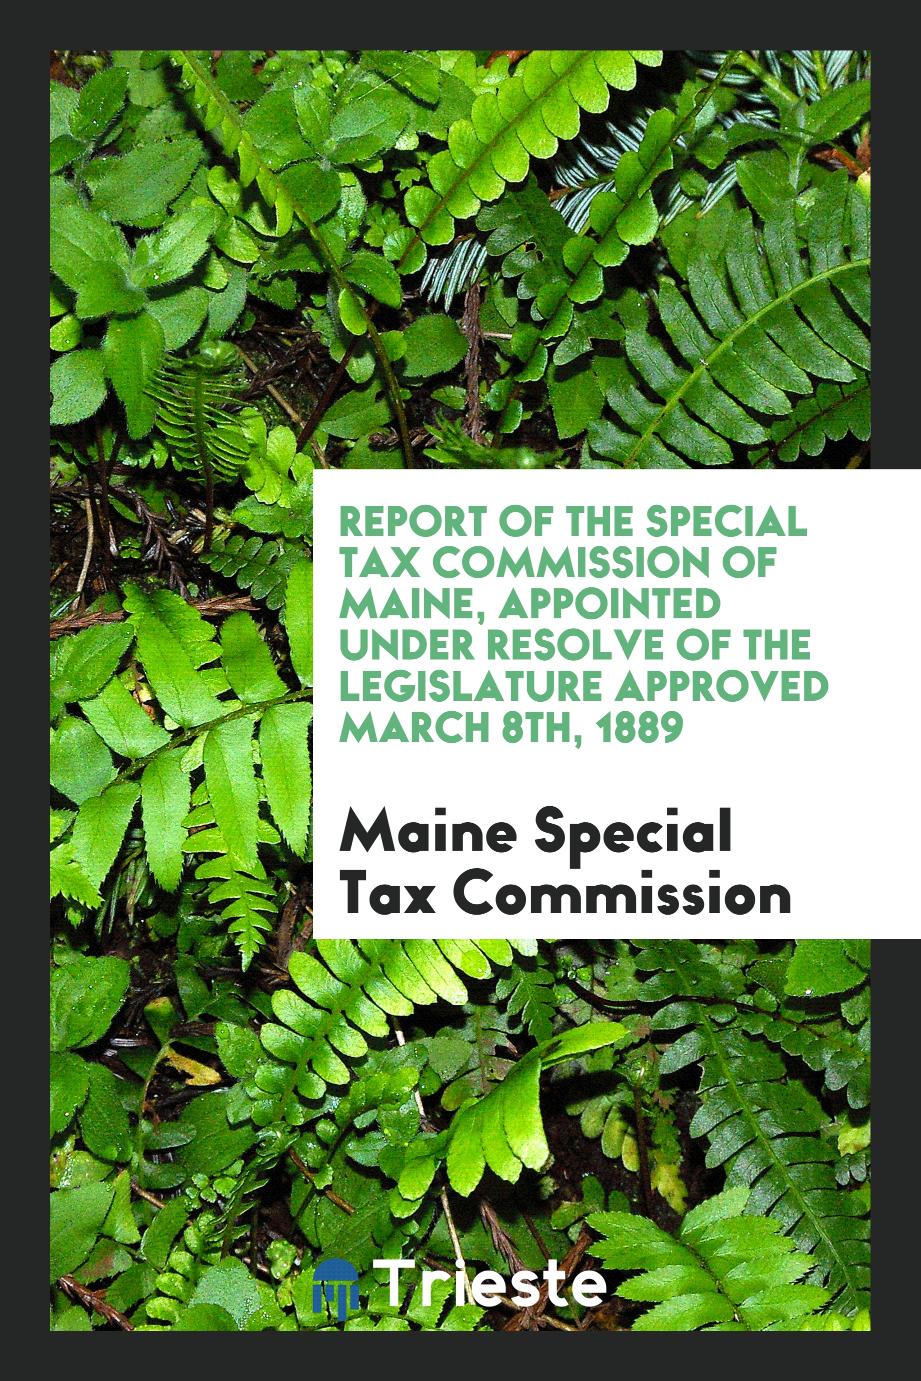 Report of the Special Tax Commission of Maine, Appointed under Resolve of the Legislature Approved March 8th, 1889